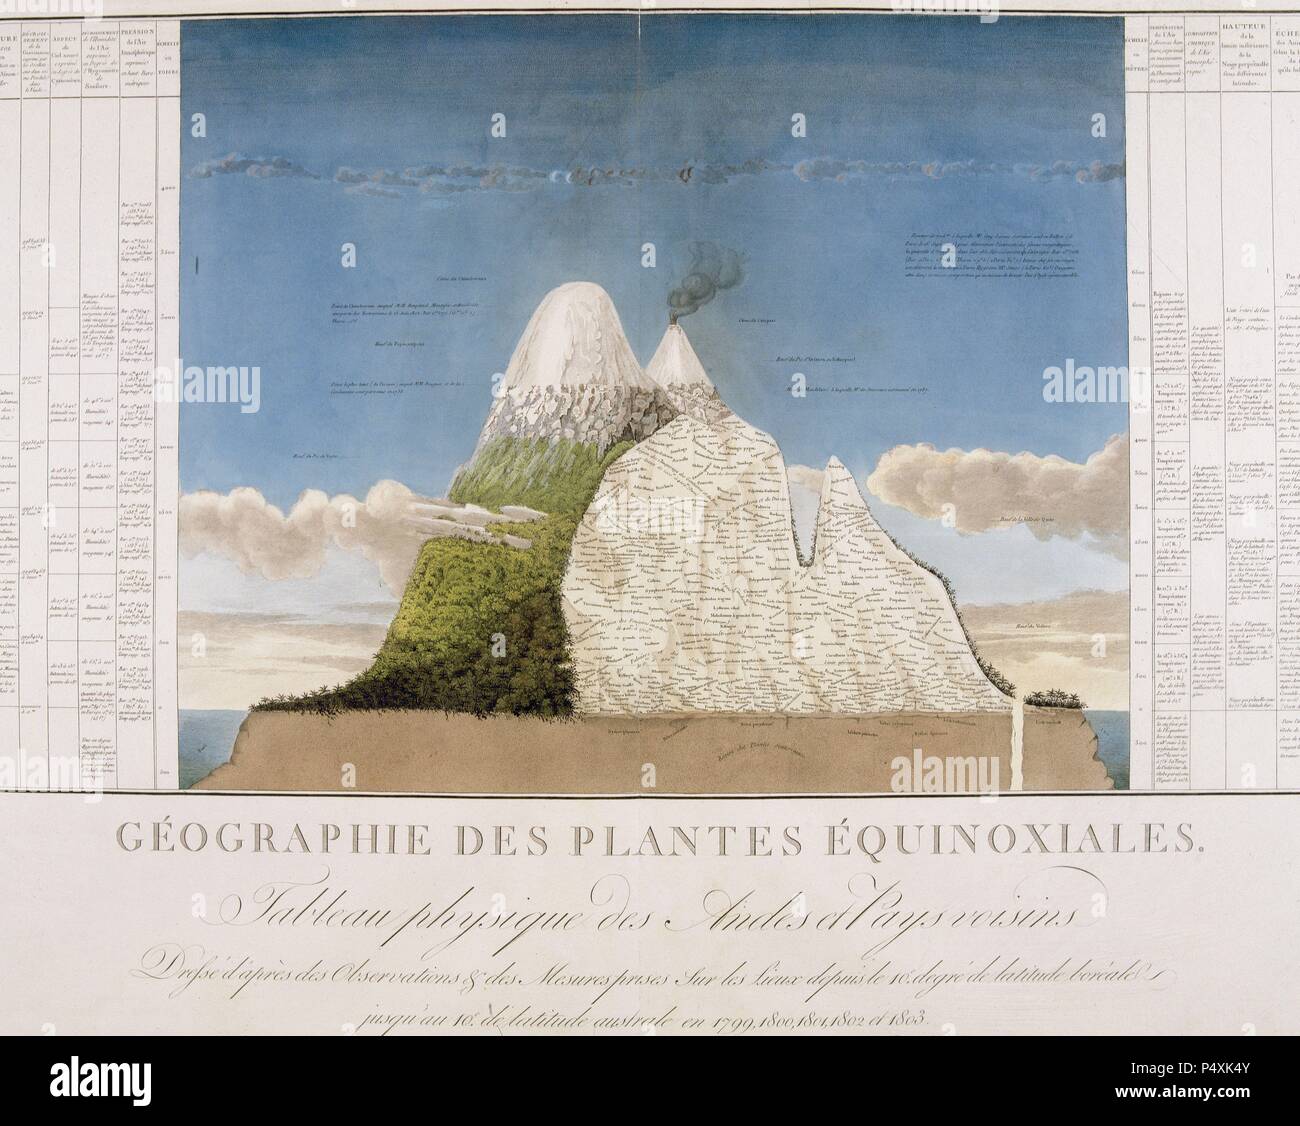 CHILE. Physical map of the Andes. Illustration of the book 'Des cordilleres et monuments des peuples de l'Amerique' by Alexander Humboldt (1769-1835). Ppublished in Paris in 1810. Stock Photo